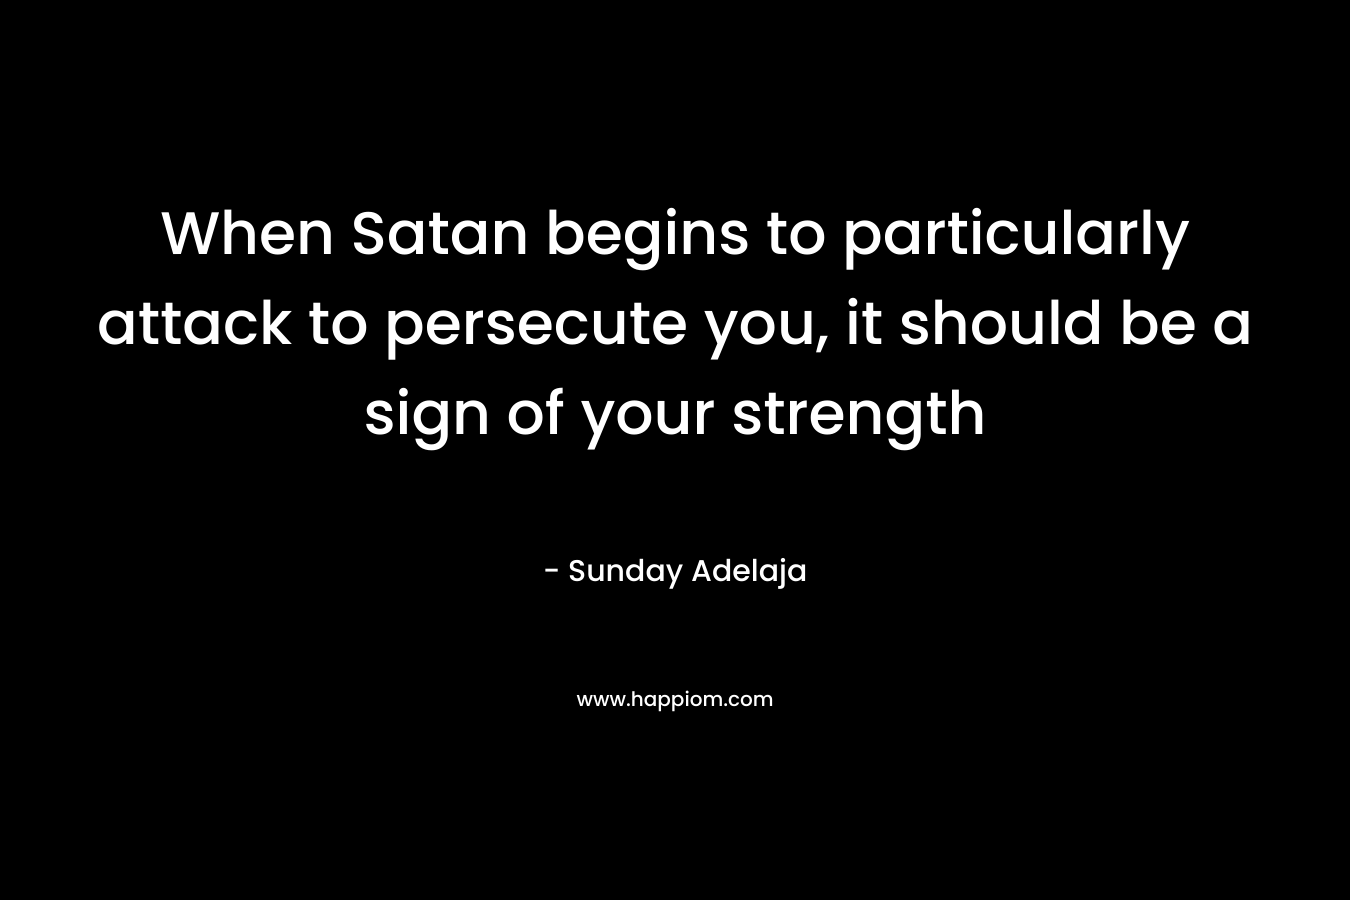 When Satan begins to particularly attack to persecute you, it should be a sign of your strength